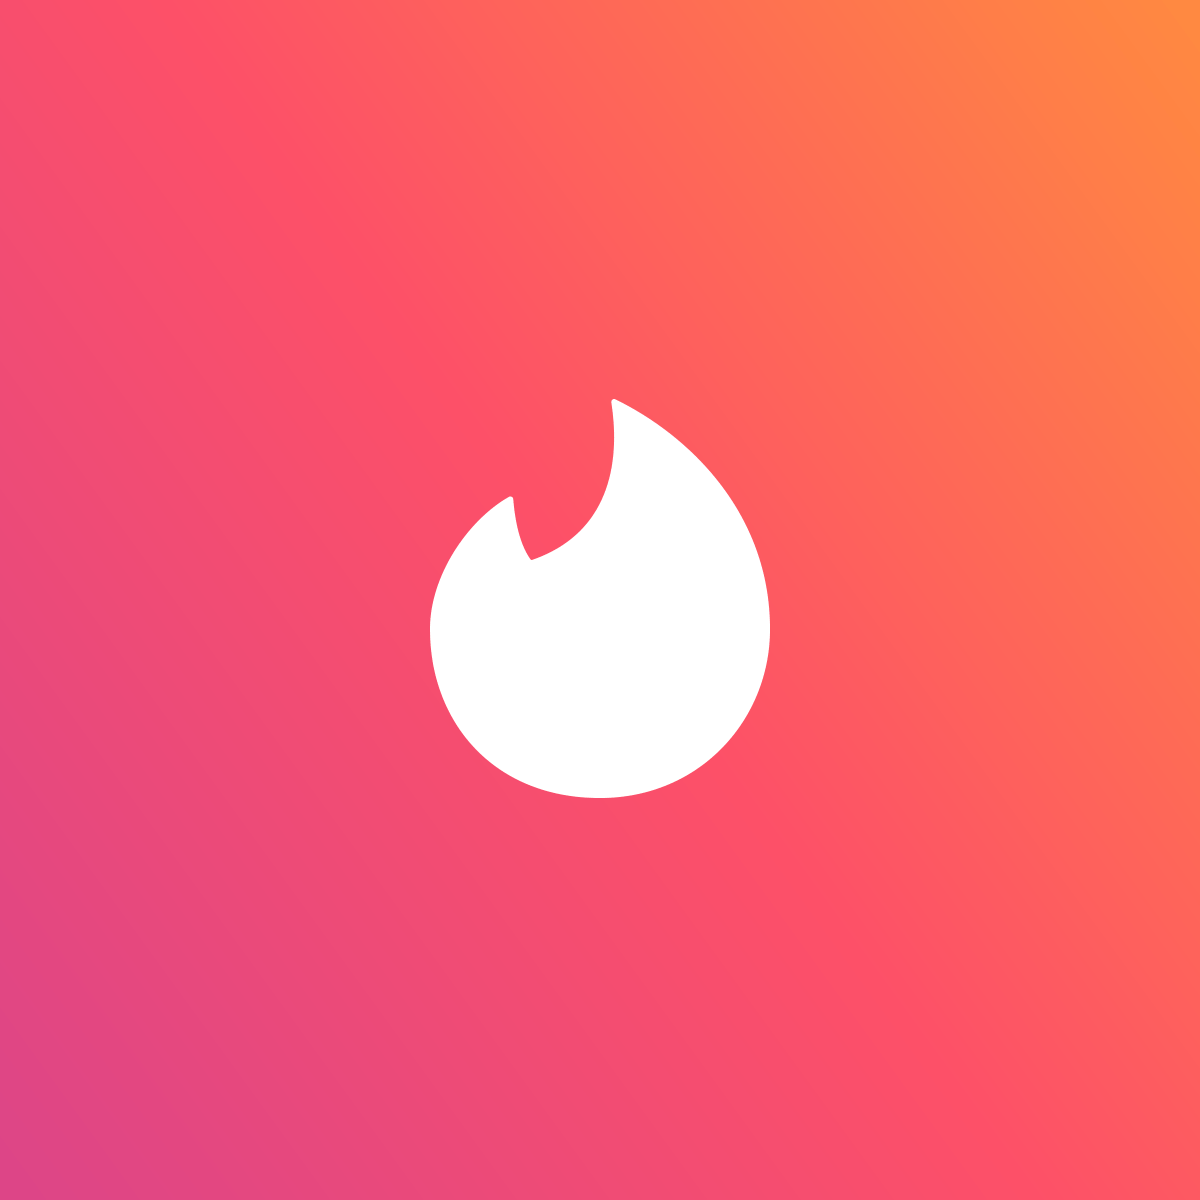 On without paying how you tinder see to who liked Tinder Hack: